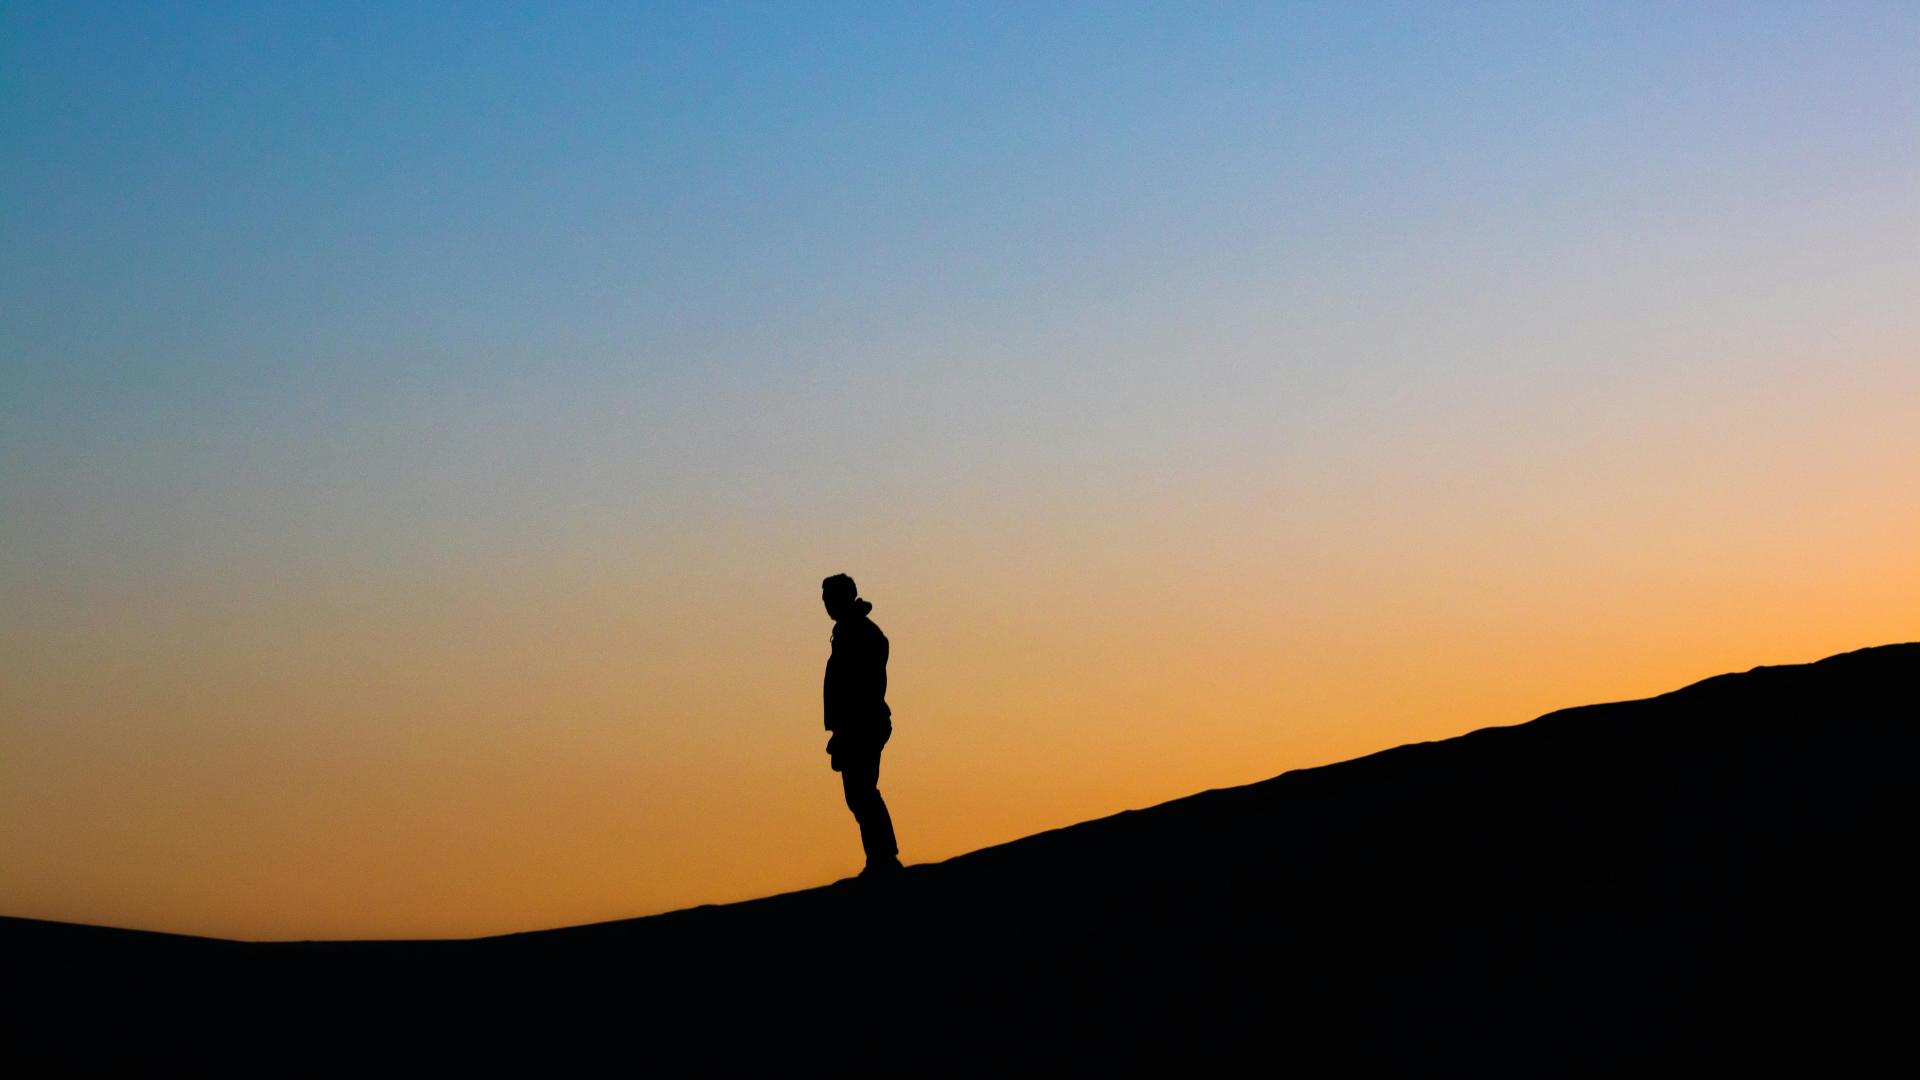 The dark silhouette of man's figure standing a top a sloping during golden hour, a warm rusty orange sunset in the background